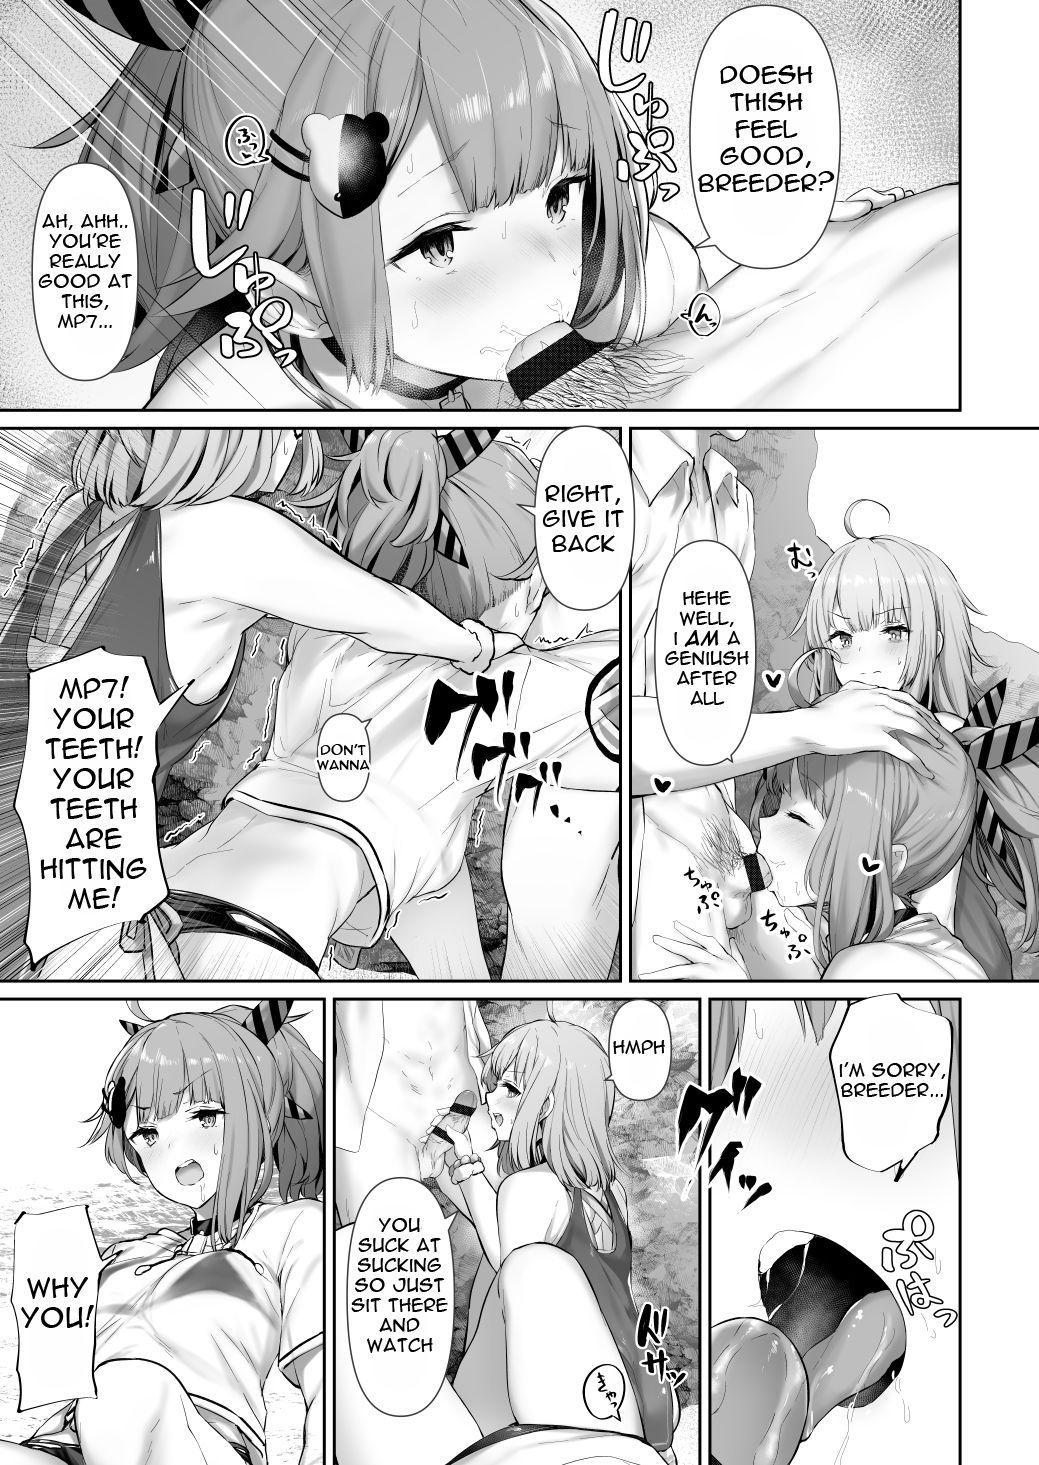 Big Ass MP7 and AA-12 no - Girls frontline No Condom - Page 3